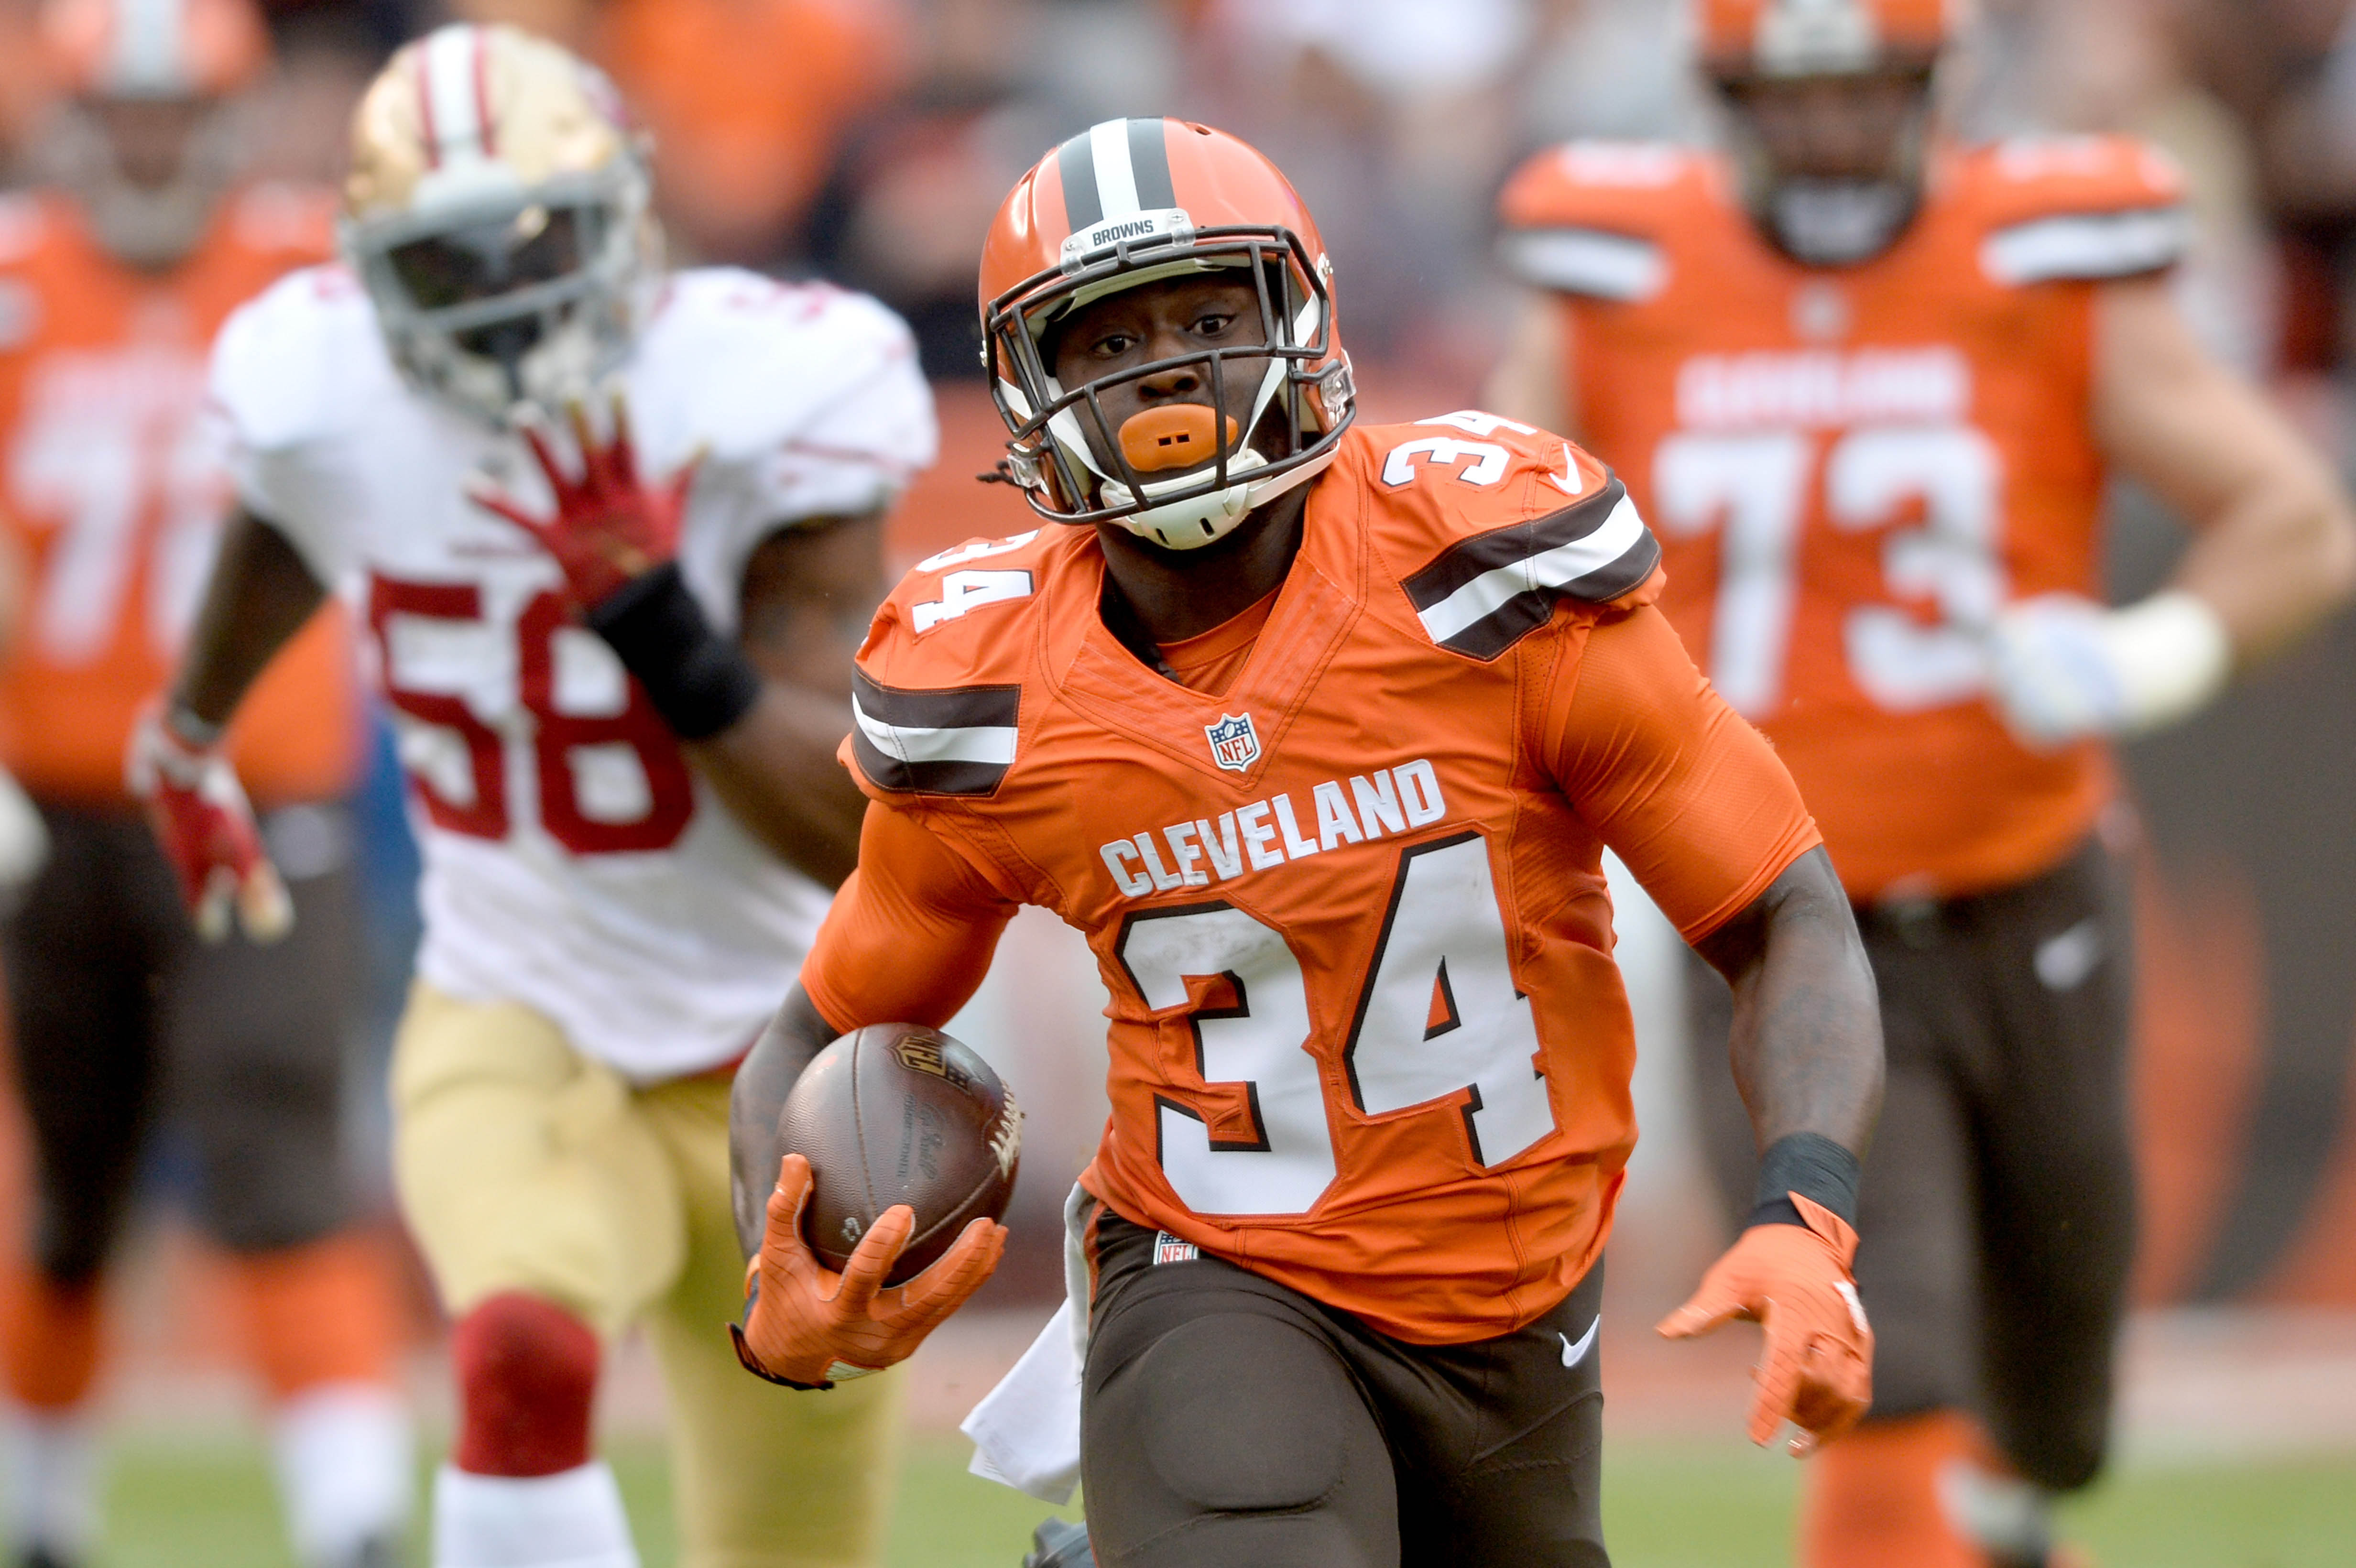 Isaiah Crowell runs Cleveland Browns past 49ers, 24-10 | wkyc.com